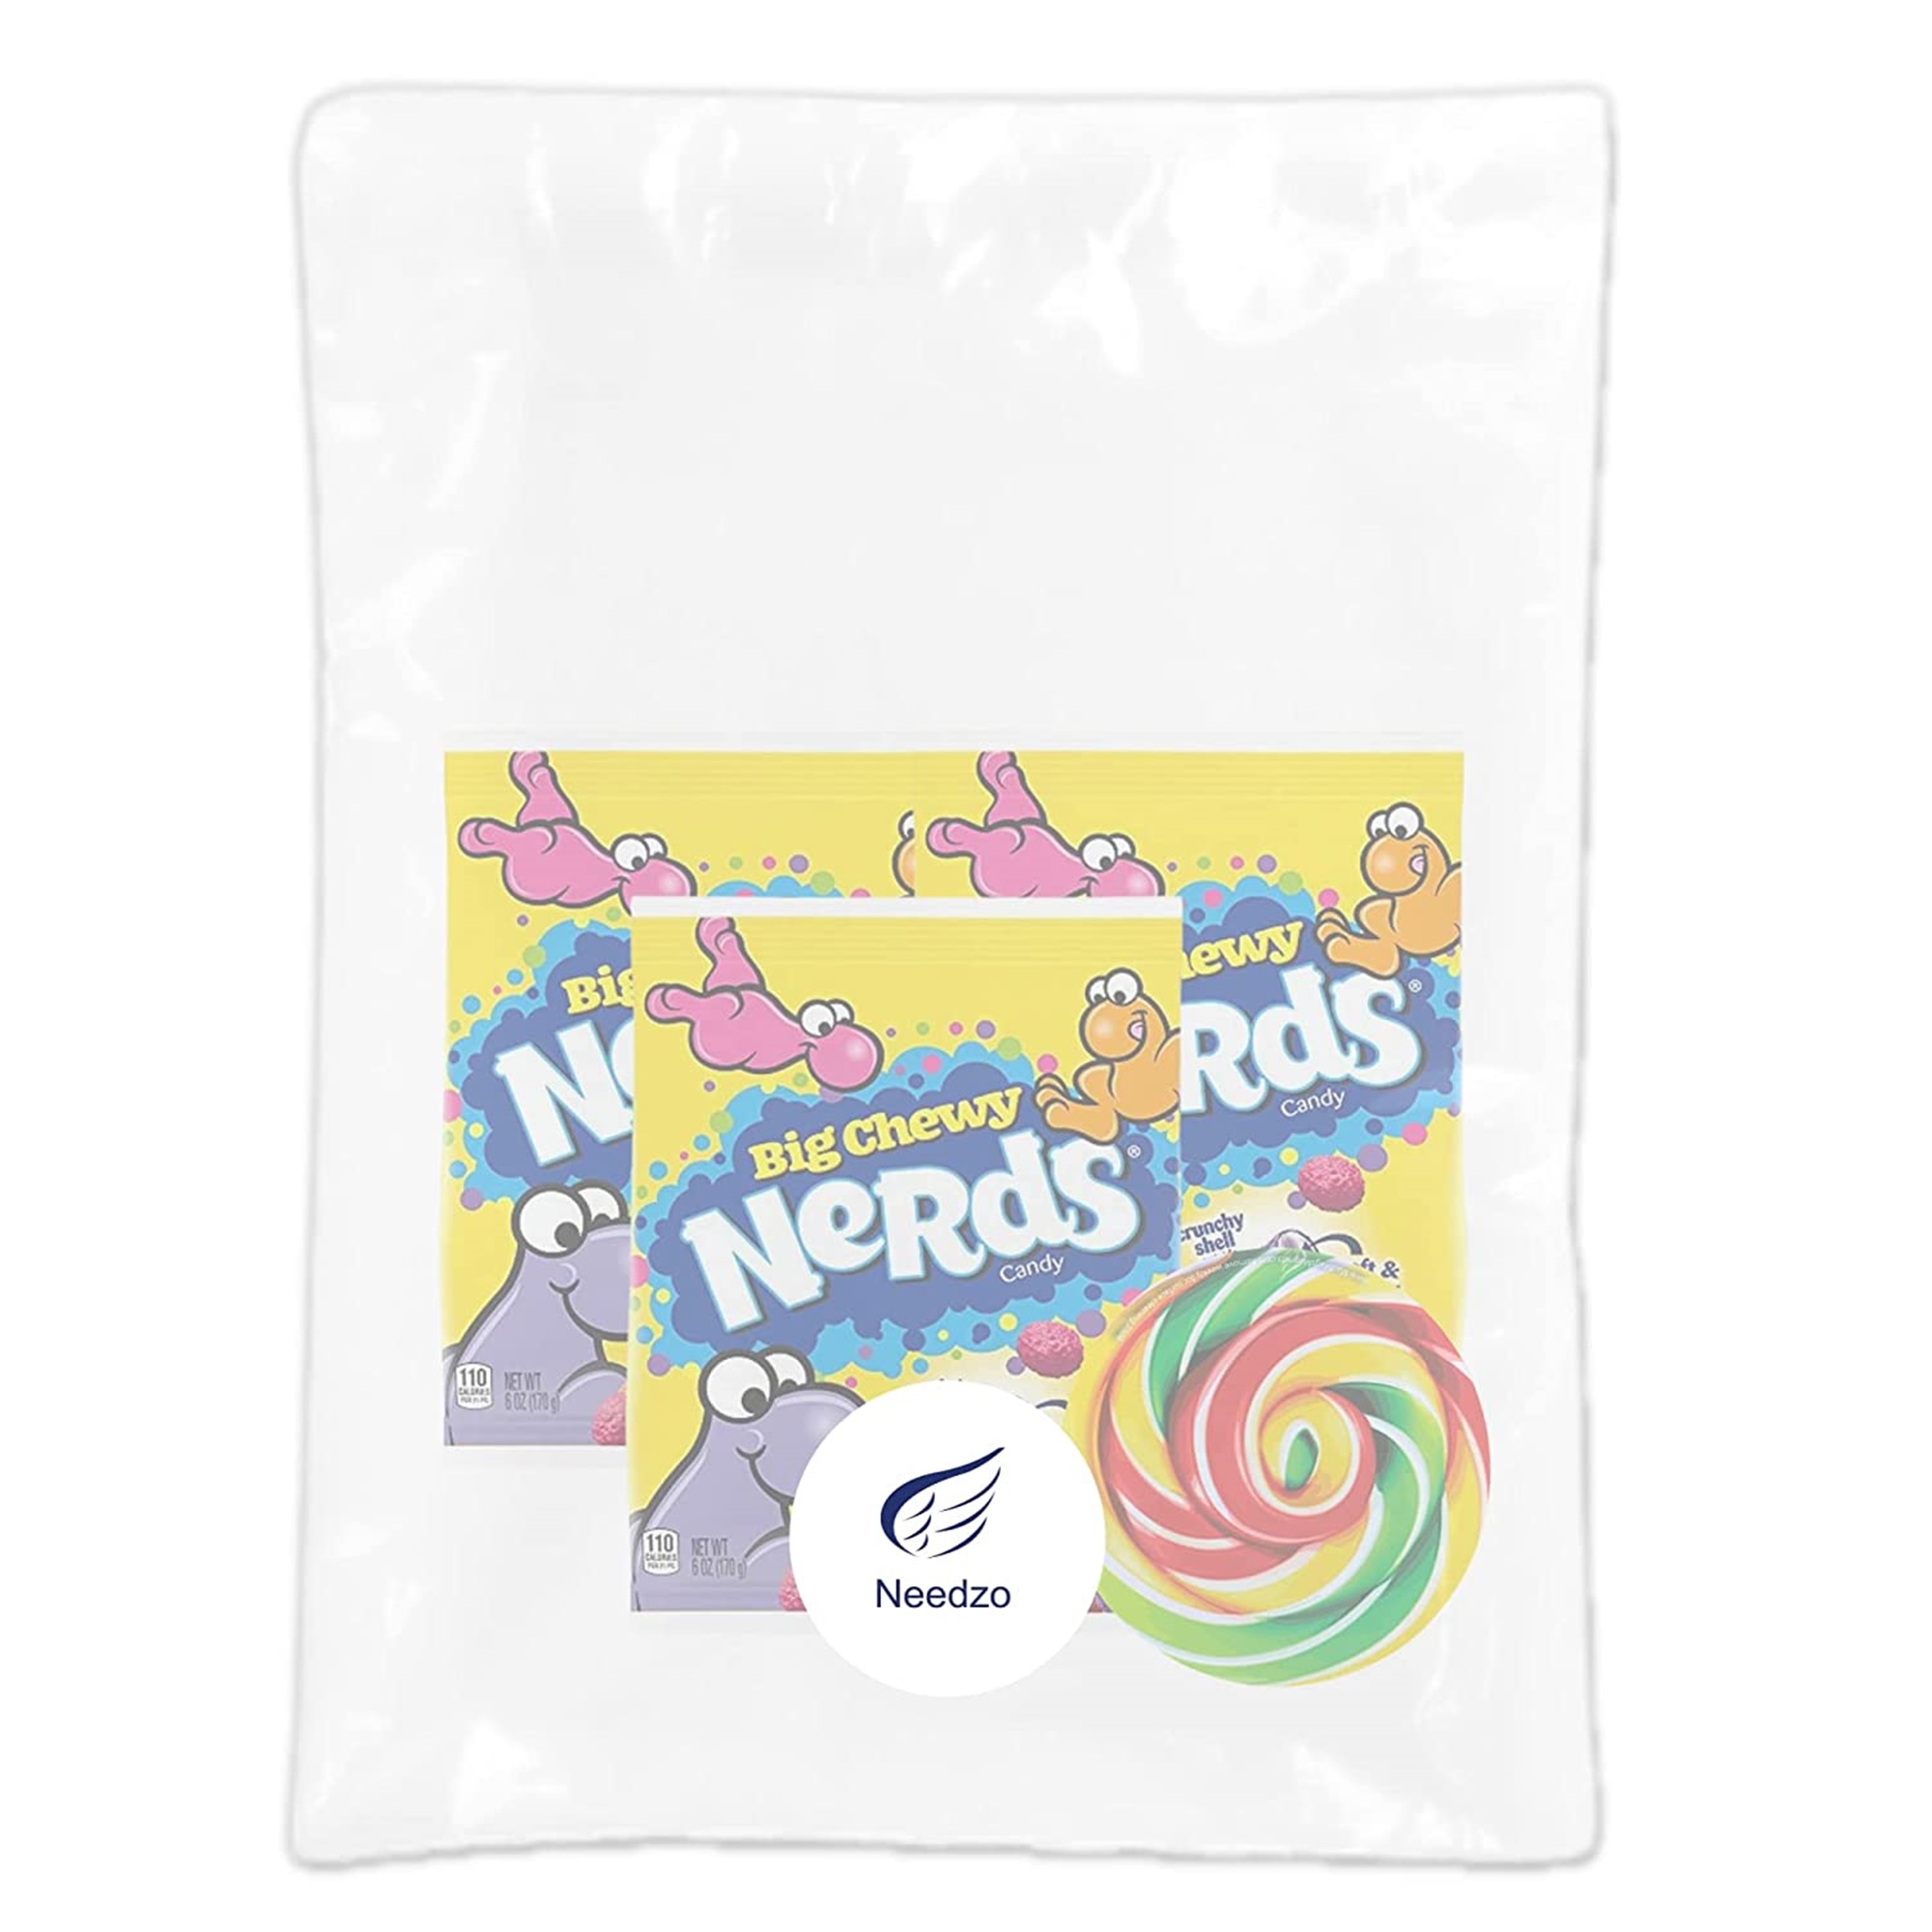 Nerds Big Chewy Gummy Candies, Hard Candy Shell with Soft Center, Assorted Fruit Flavors, Candy Magnet Included, Pack of 3, 6 Ounces Each - image 2 of 7